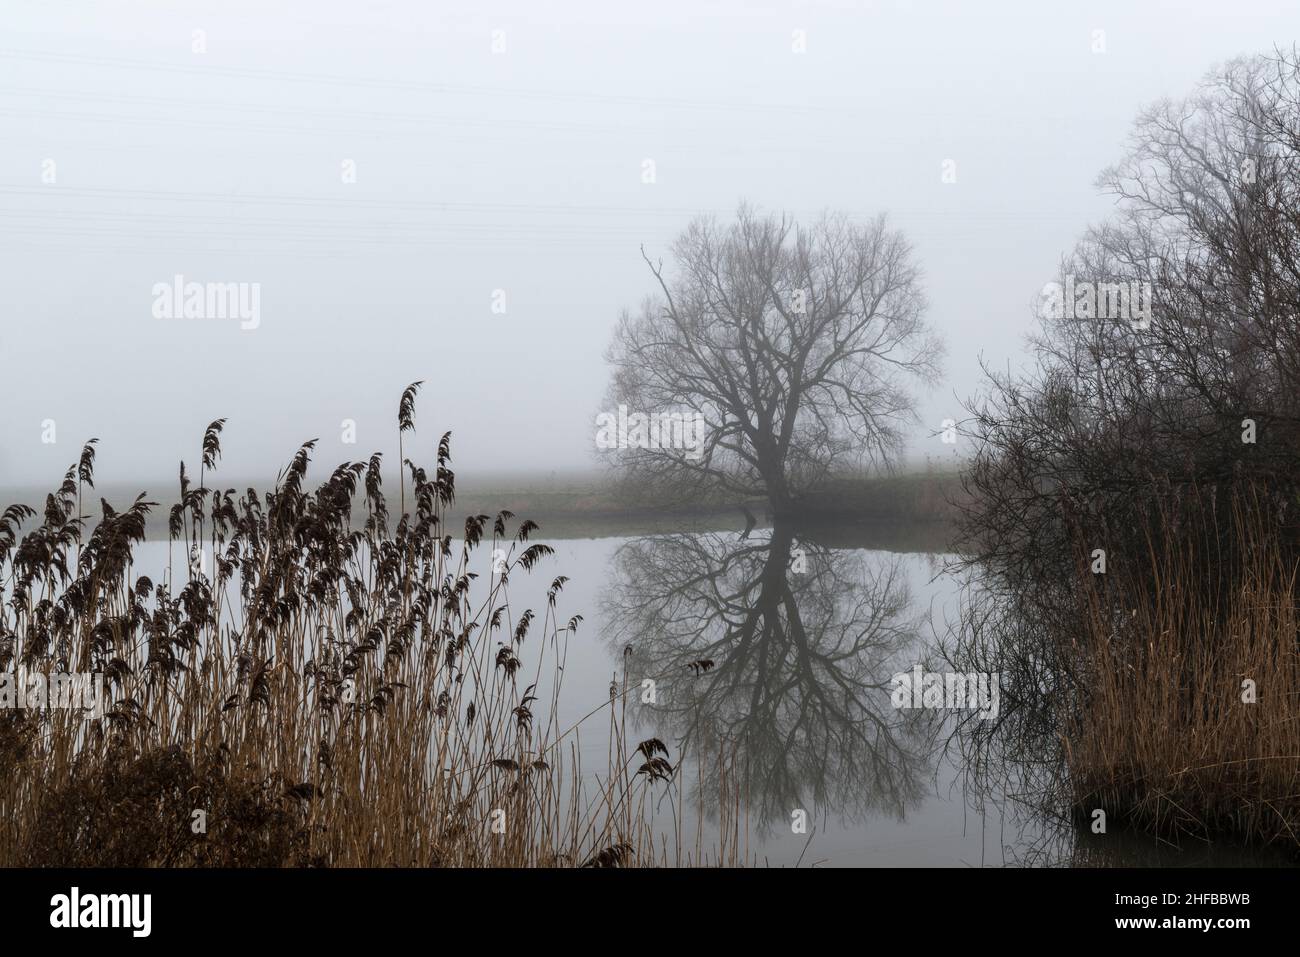 Silhouettes and reflection of leafless trees  in a small lake in misty weather. Zuid-Beveland, Zeeland province, the Netherlands. Stock Photo